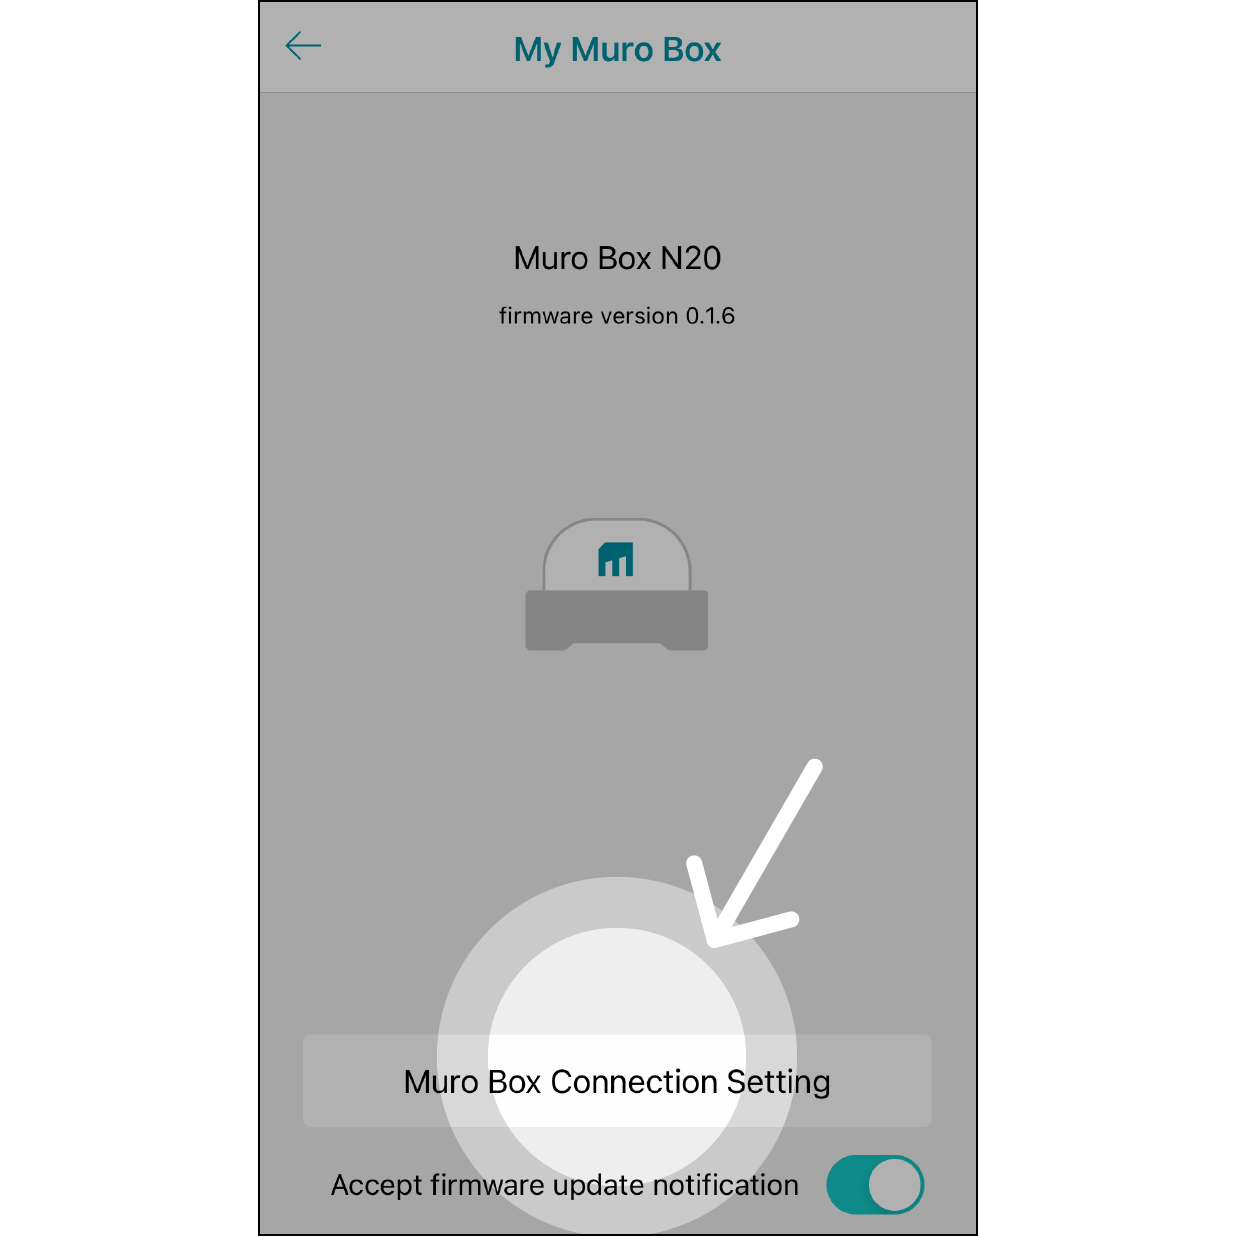 Click Muro Box Connection Setting to start a pairing process between music box and App